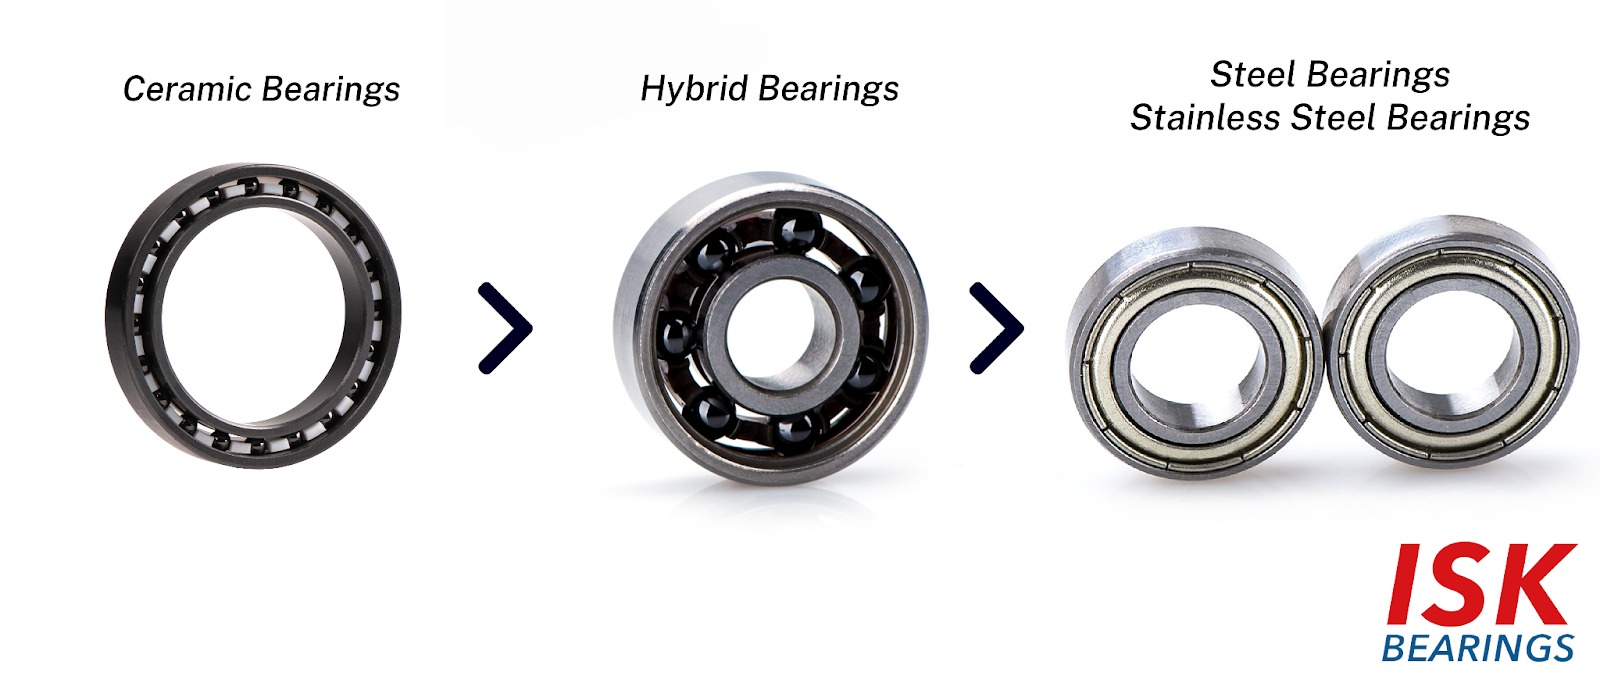 Comparison of speed stability in Electric Bicycle Bearings